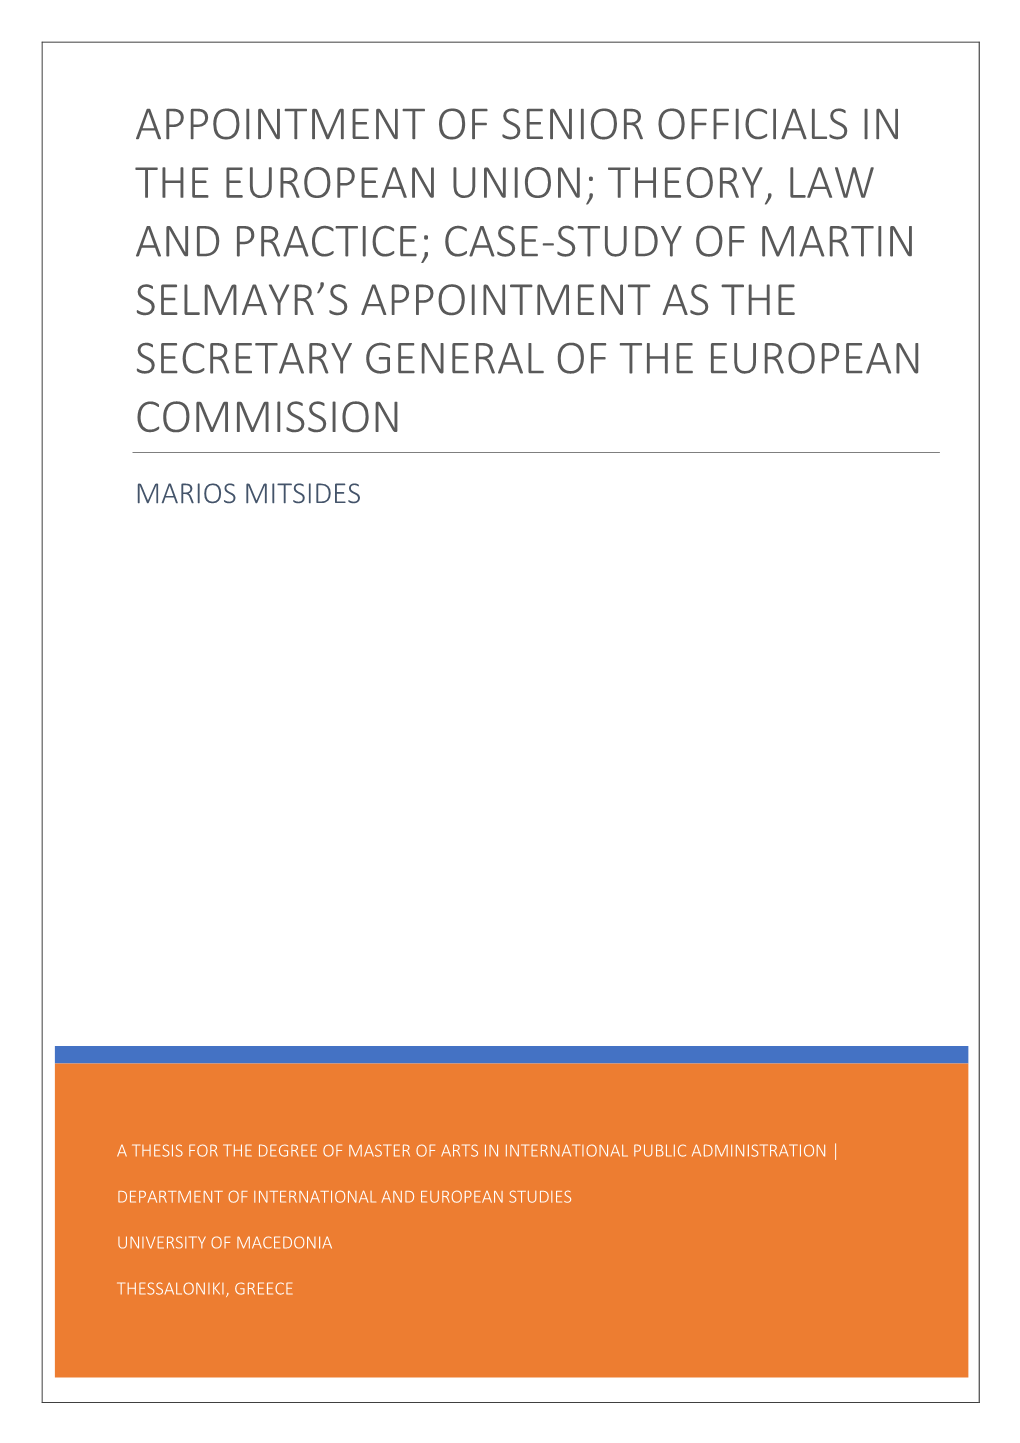 Case-Study of Martin Selmayr's Appointment As